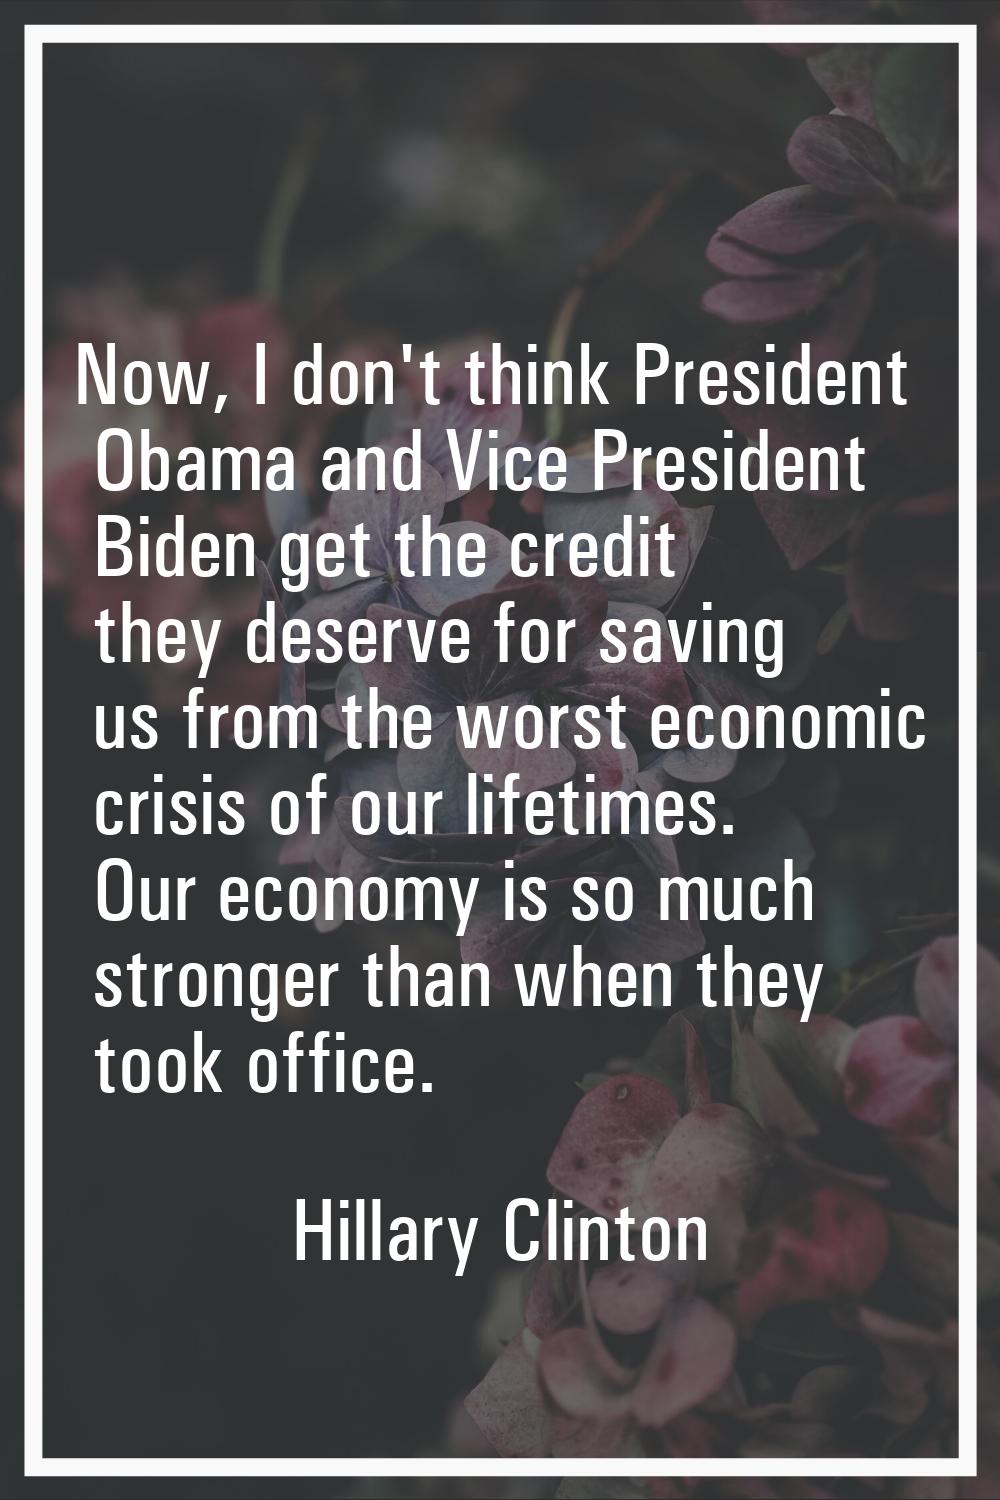 Now, I don't think President Obama and Vice President Biden get the credit they deserve for saving 